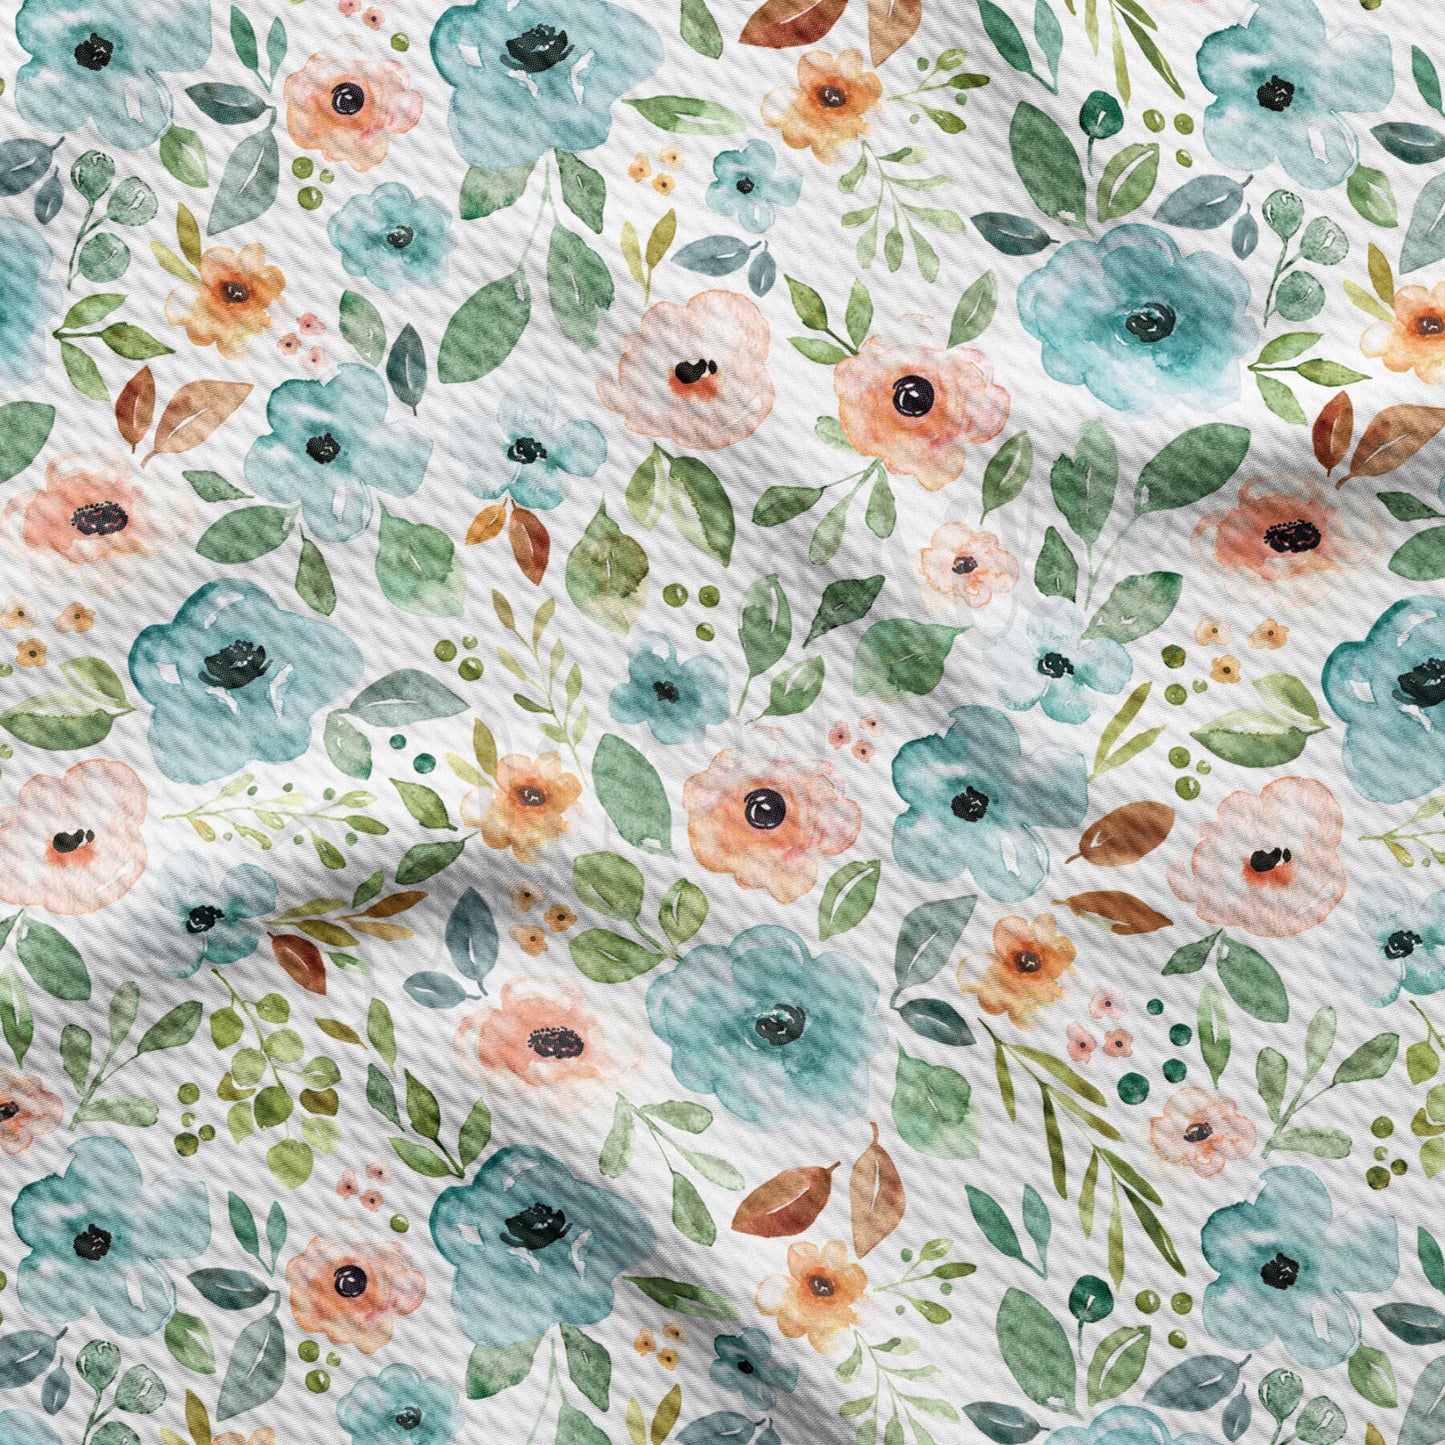 Floral l Bullet Textured Fabric by the yard AA1639